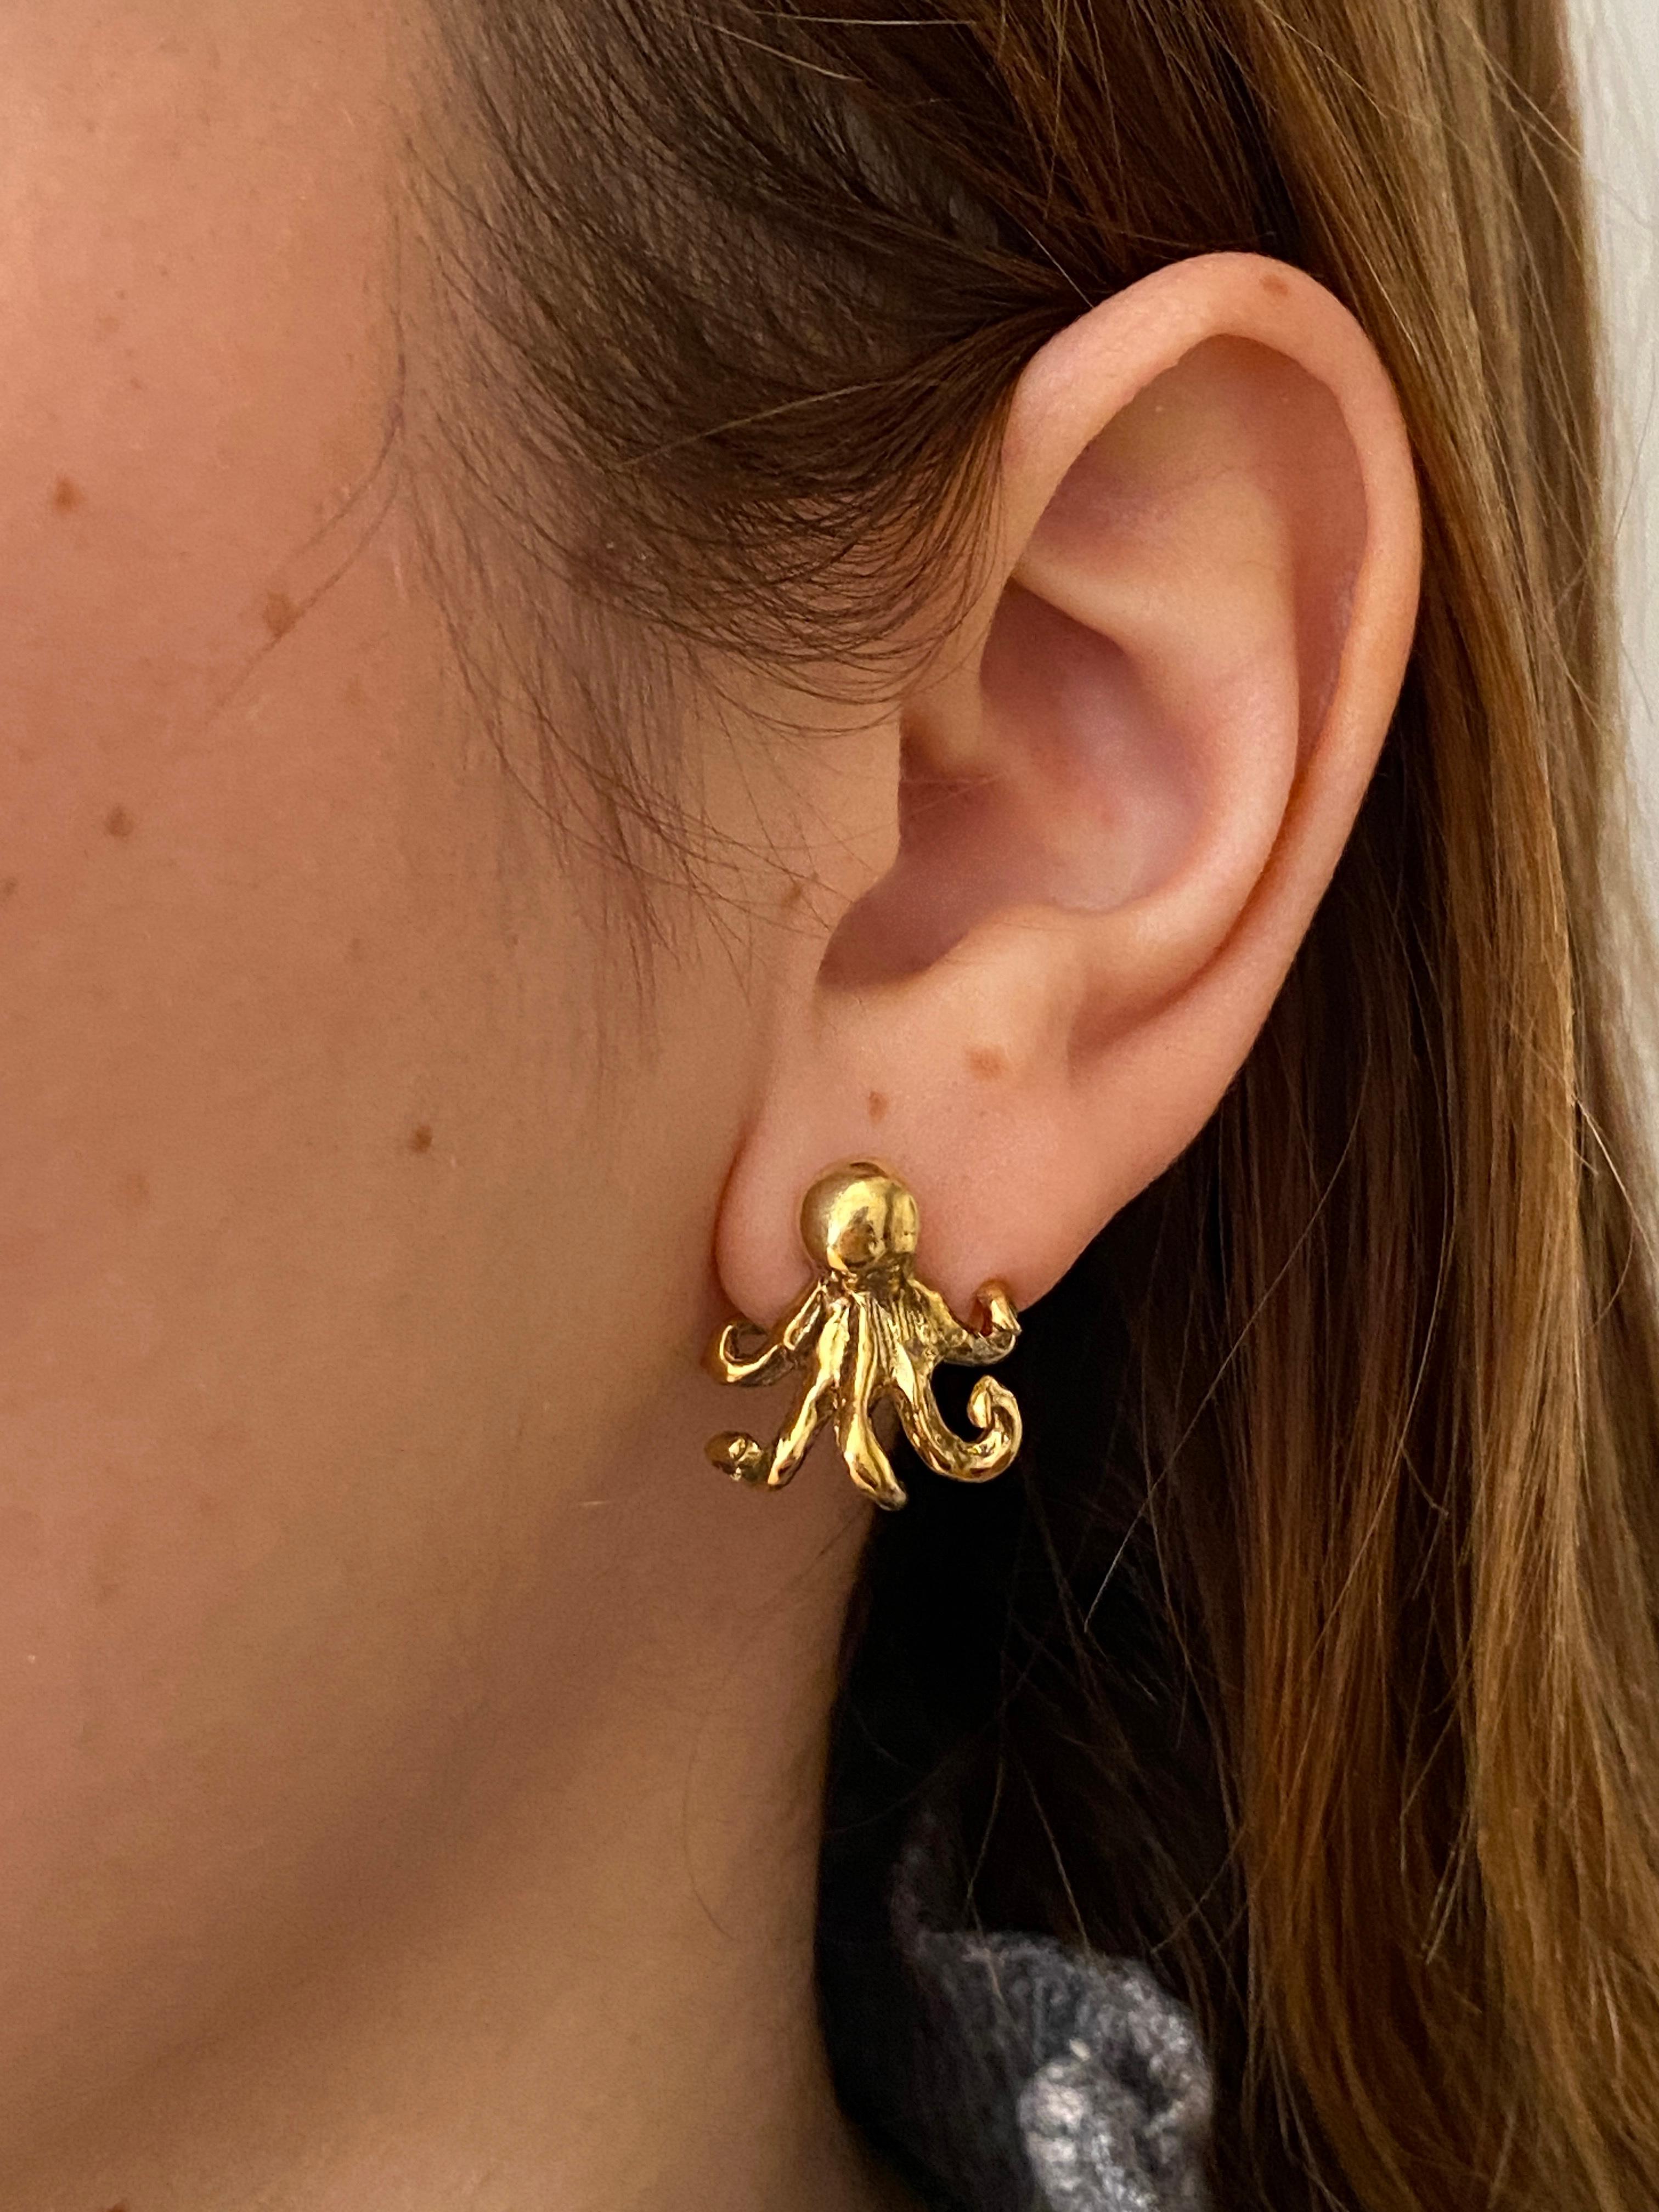 Introducing Rossella Ugolini's enchanting 18K Yellow Gold stud earrings, meticulously handcrafted in Italy. These captivating earrings feature an Octopus shape, making them a delightful choice for Nature and Sea enthusiasts.

Crafted with the unique